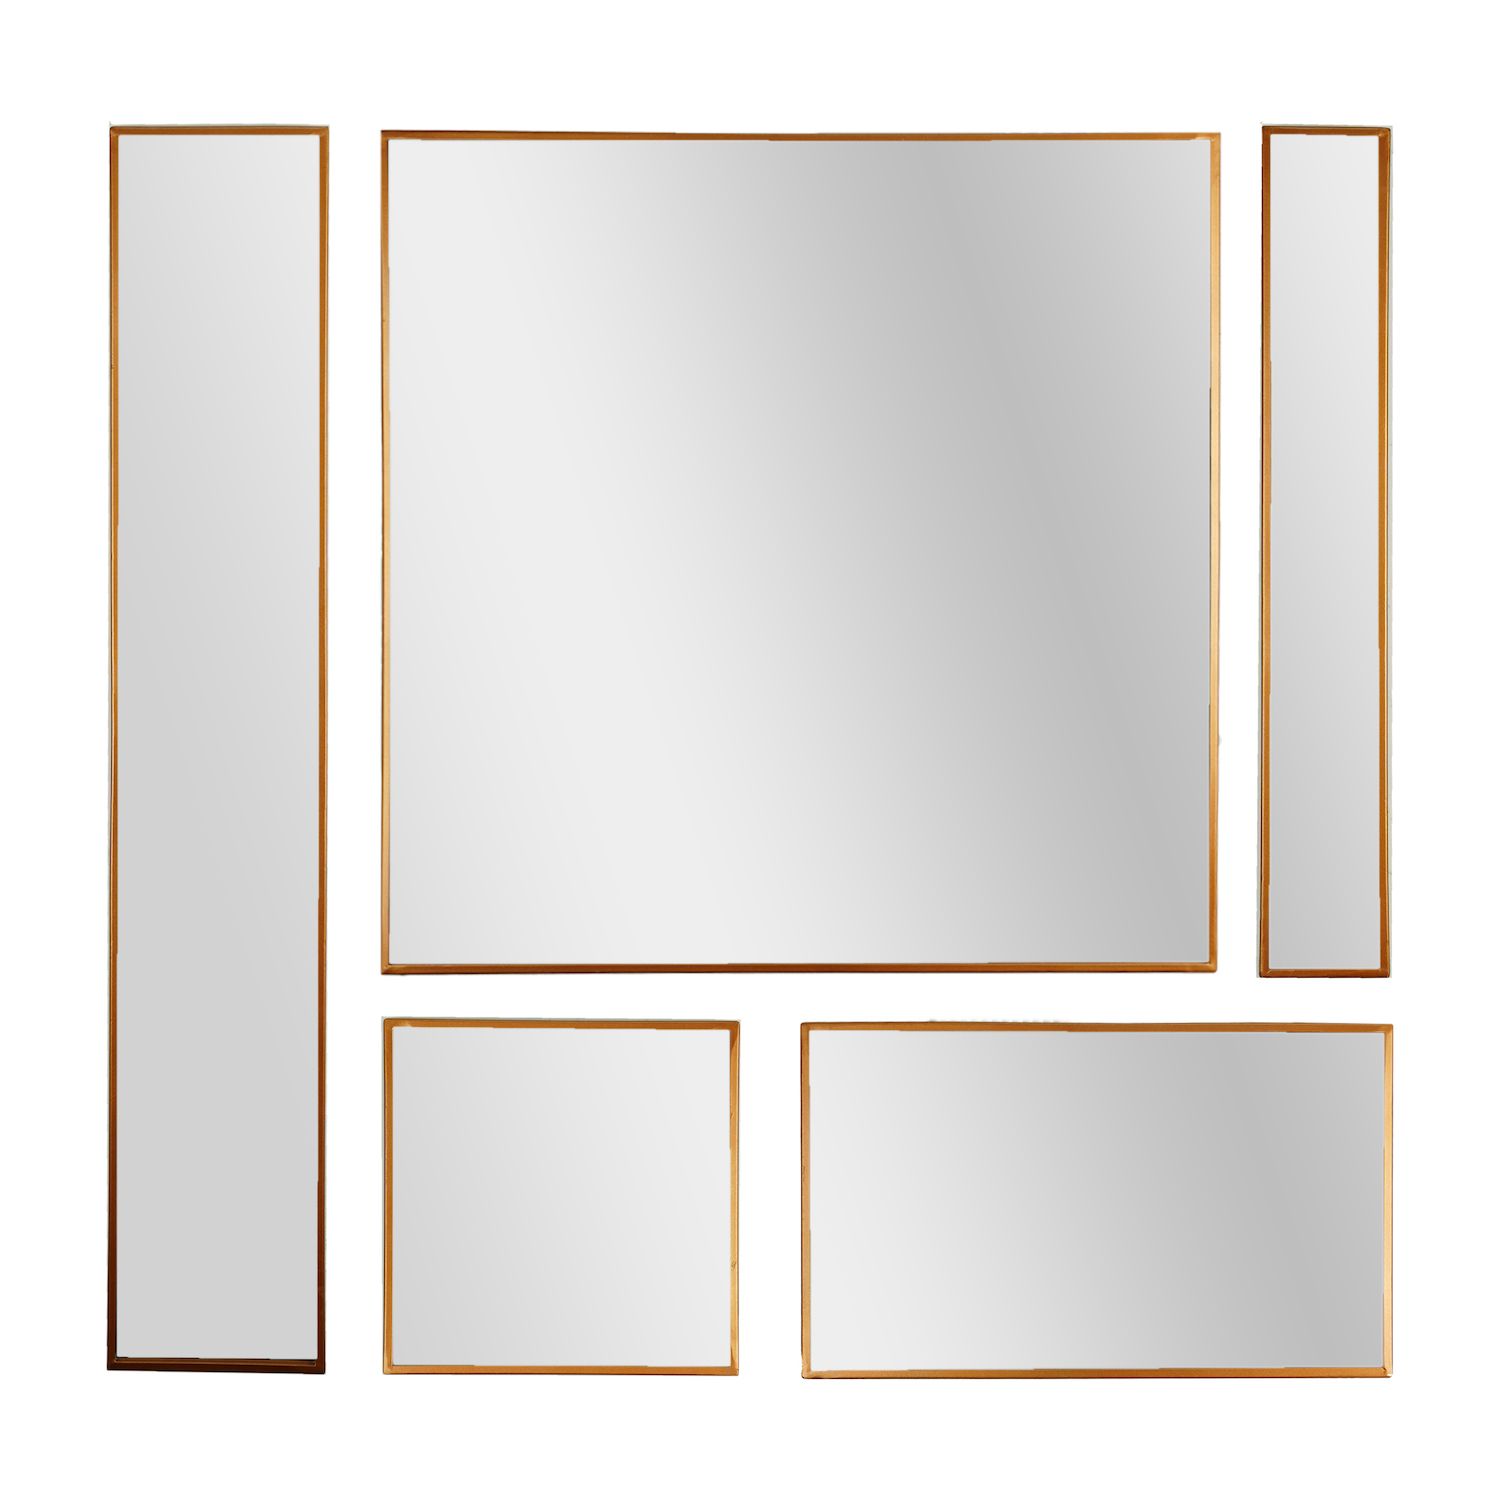 Image for Head West Bronze Decorative 5-Piece Wall Mirror at Kohl's.